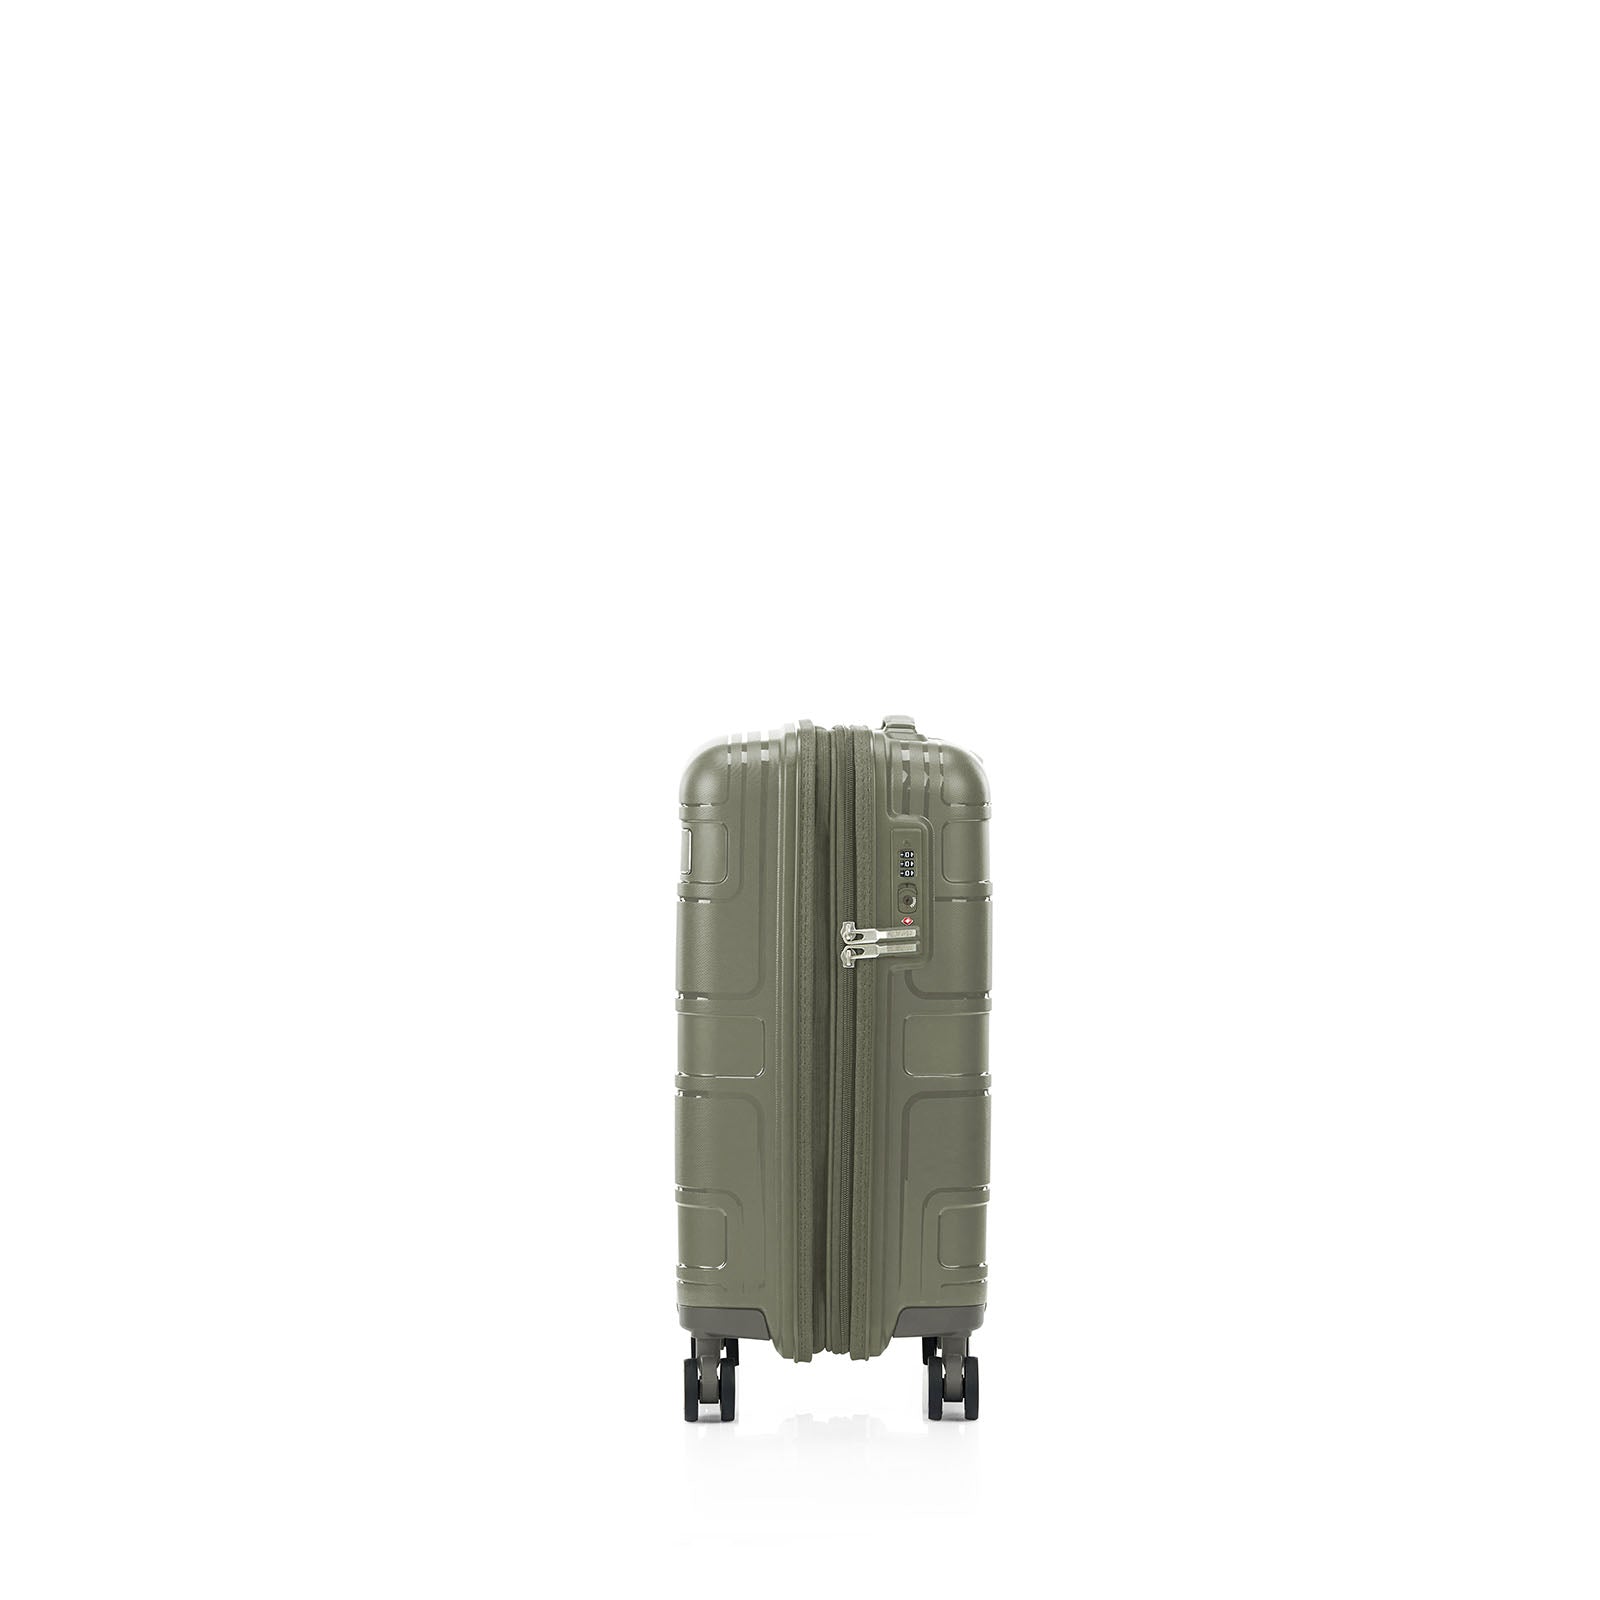 American-Tourister-Light-Max-55cm-Carry-On-Suitcase-Khaki-Side